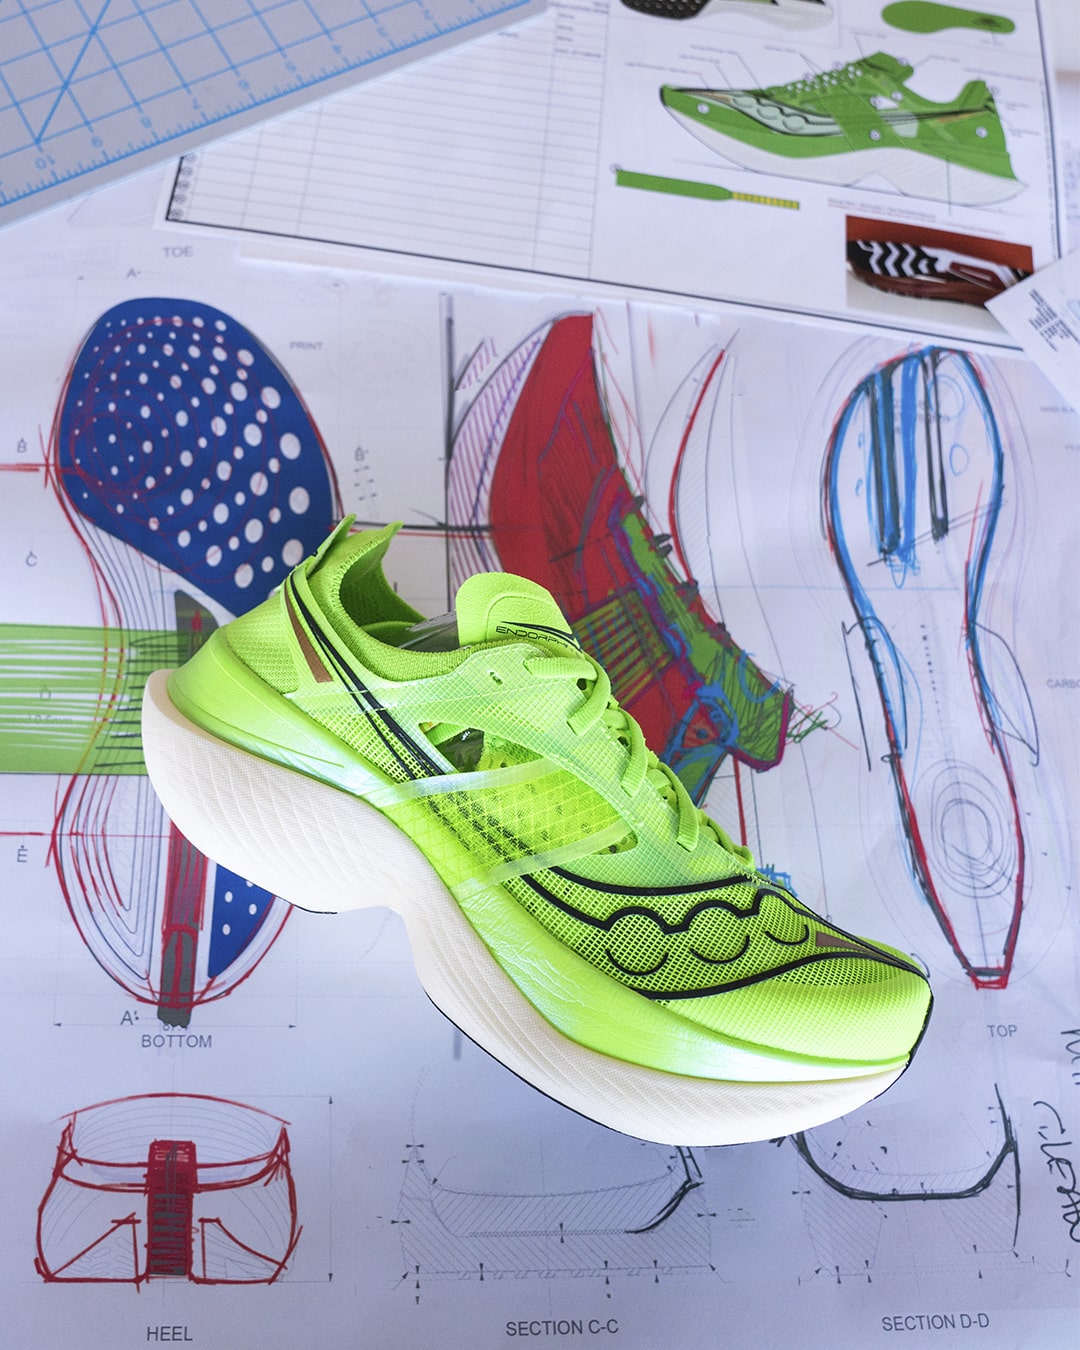 What are carbon-plated running shoes?